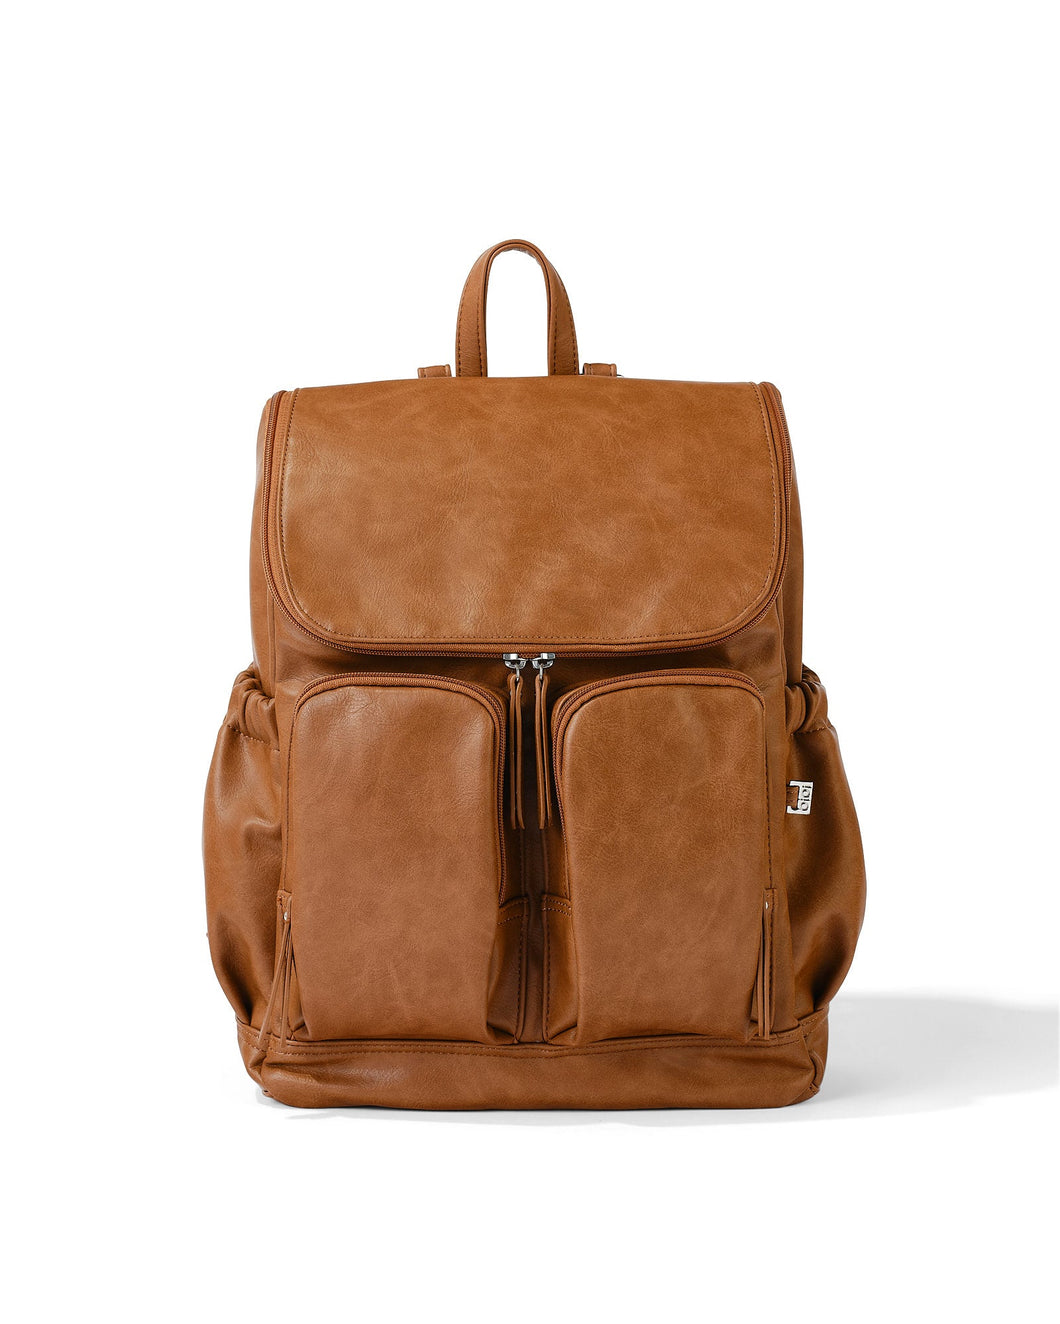 OIOI NAPPY BAG FAUX TAN BACKPACK